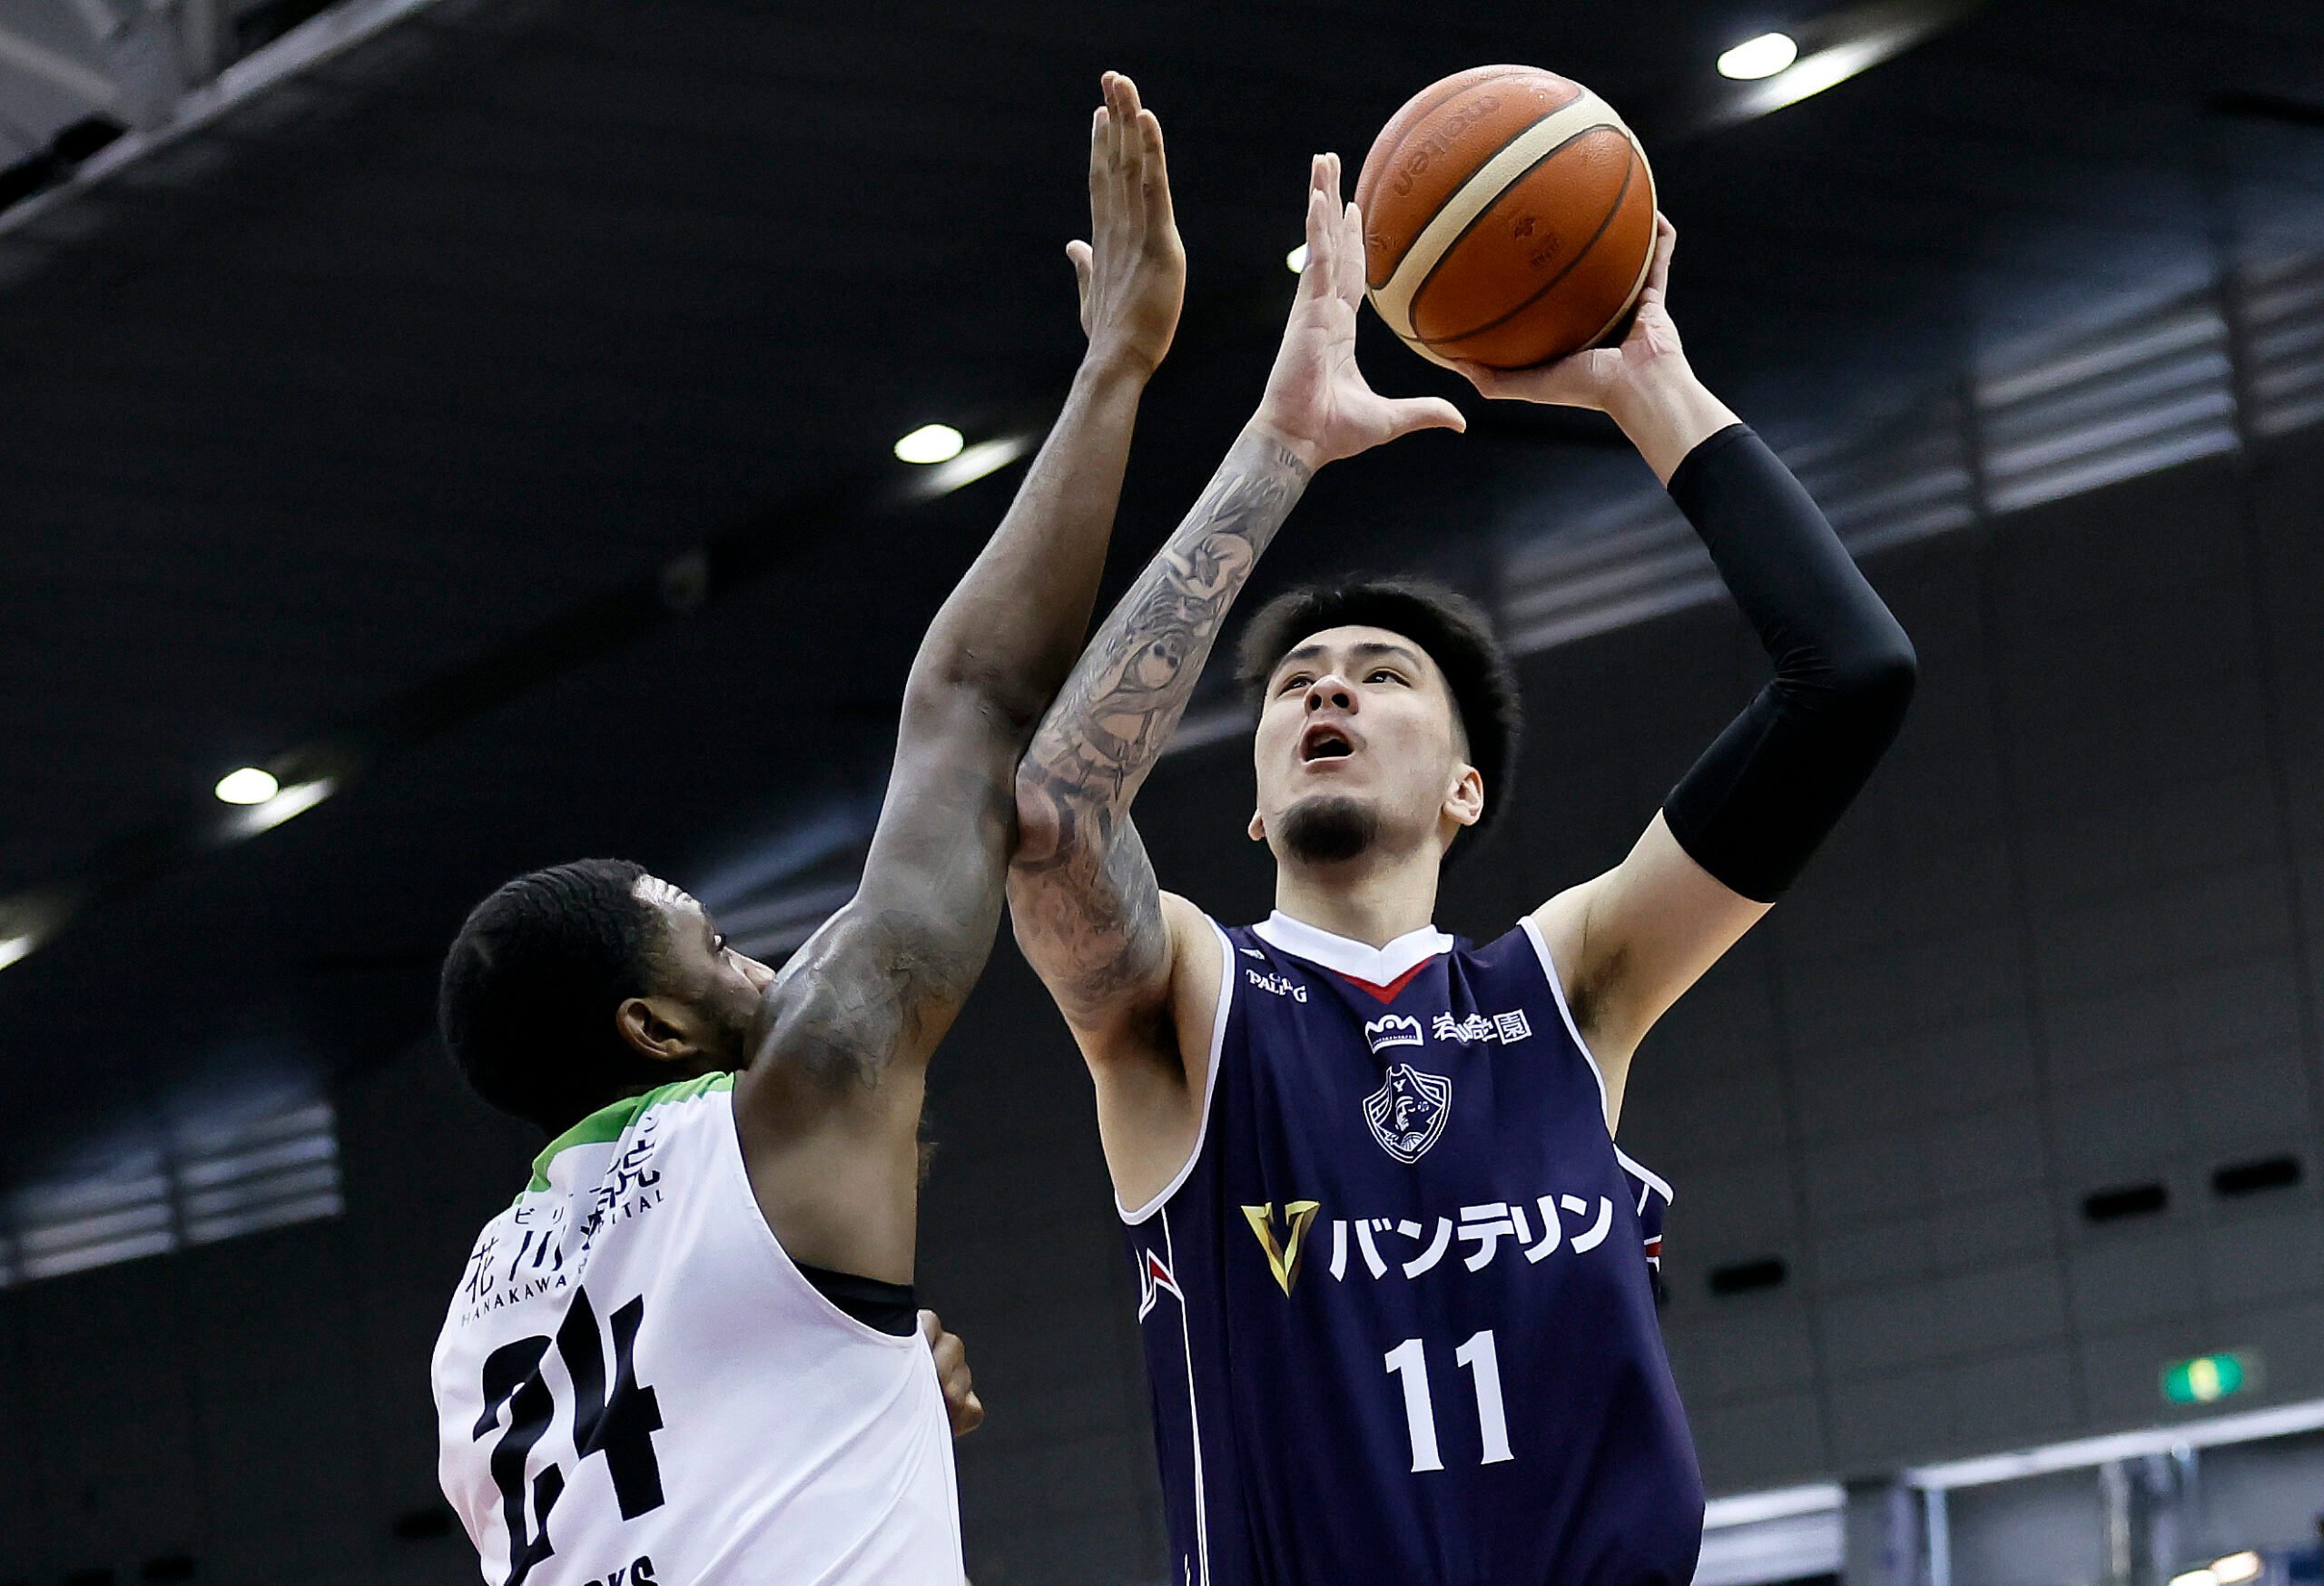 Double-double machine: Kai Sotto continues to flex muscles in Japan